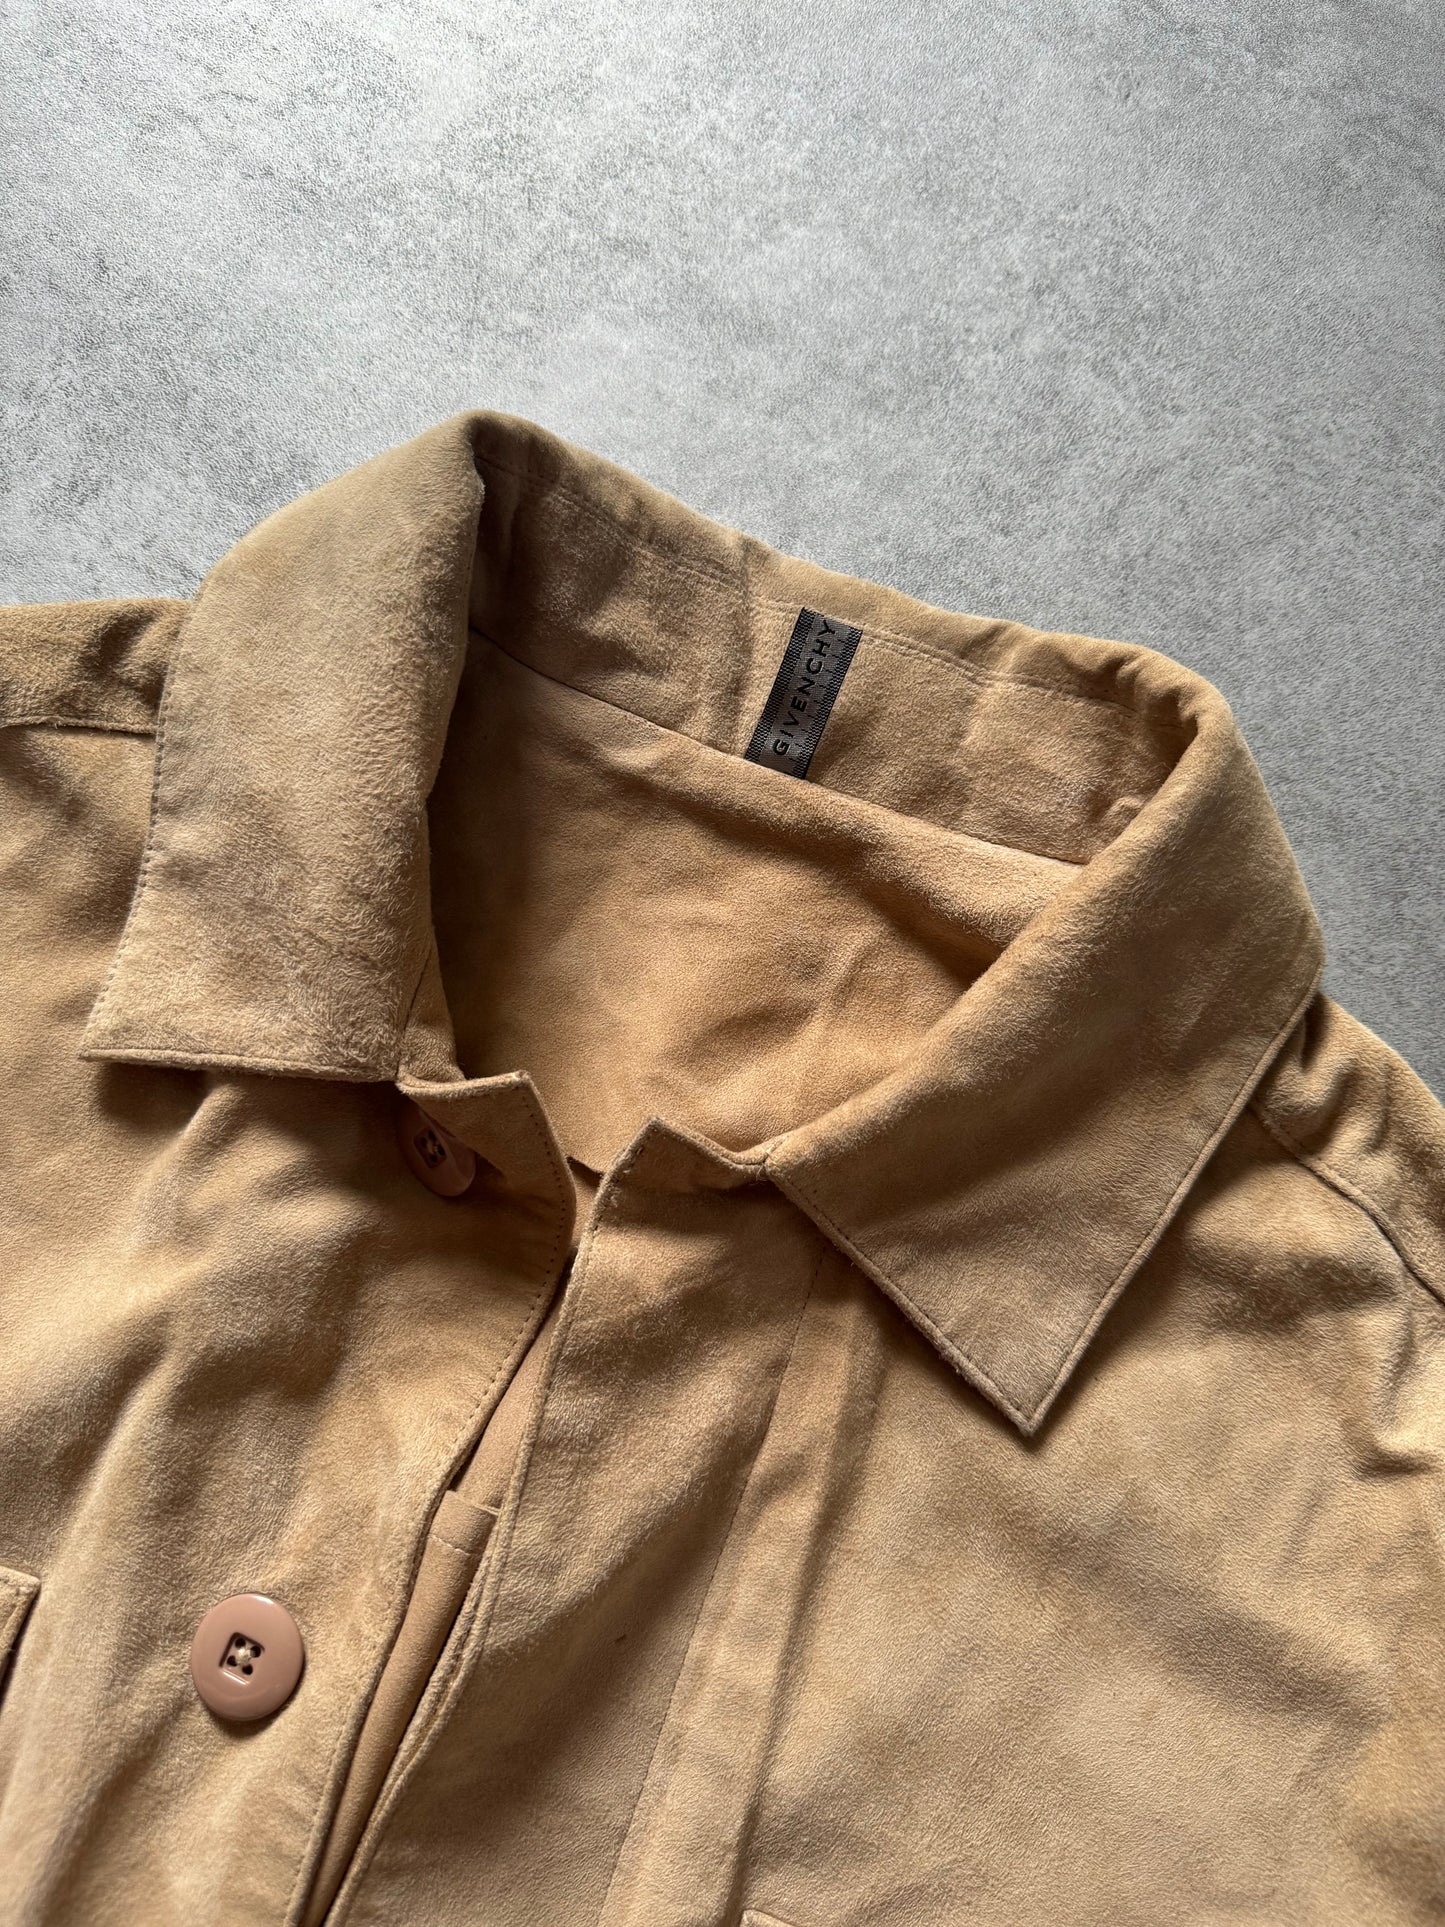 AW2004 Givenchy Camel Leather Shirt (L) - 11